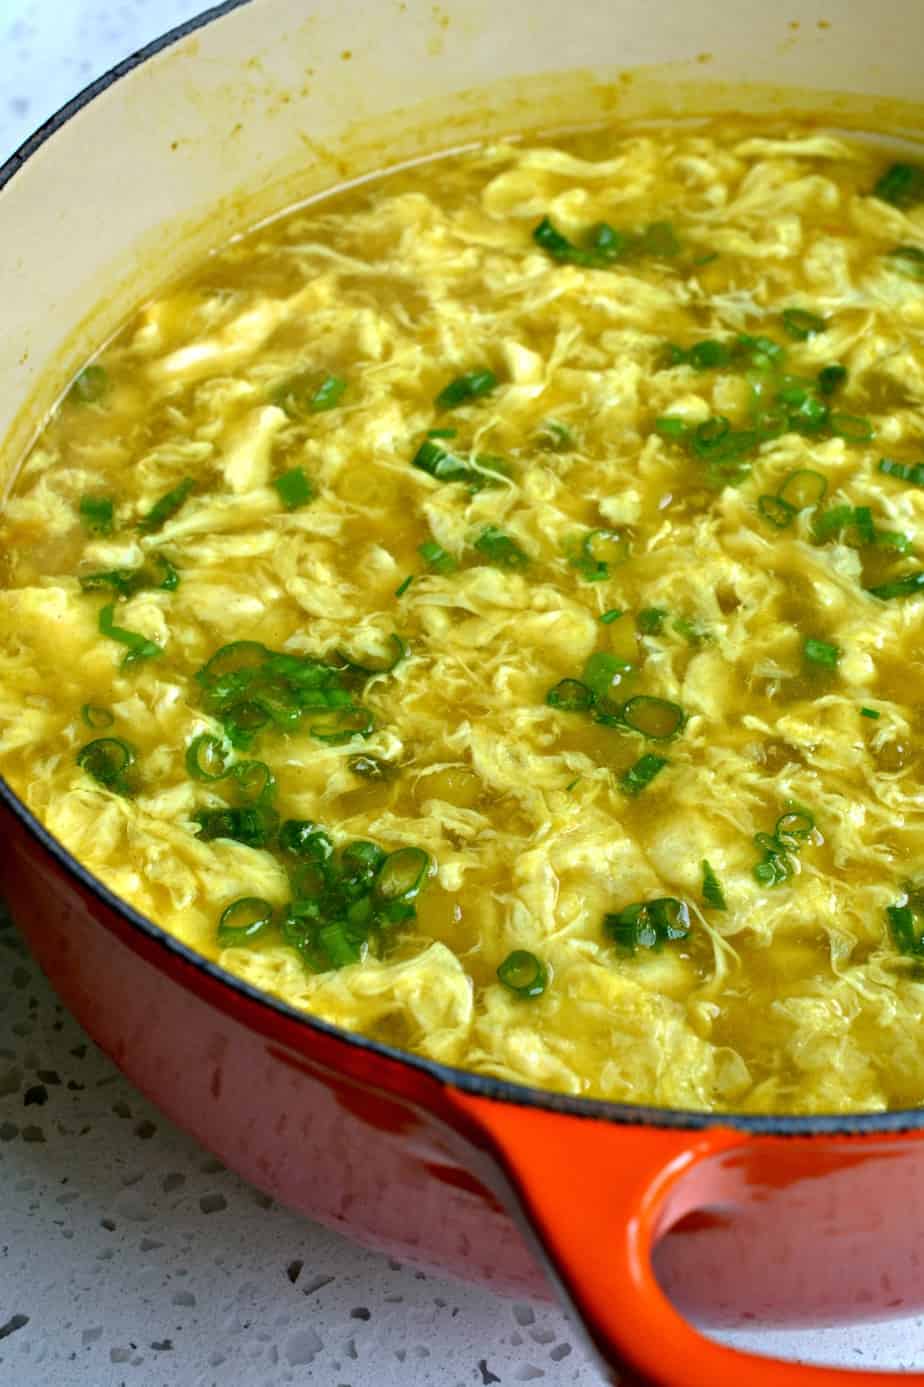 This Egg Drop Soup is so easy to make and it comes together in less than fifteen minutes.